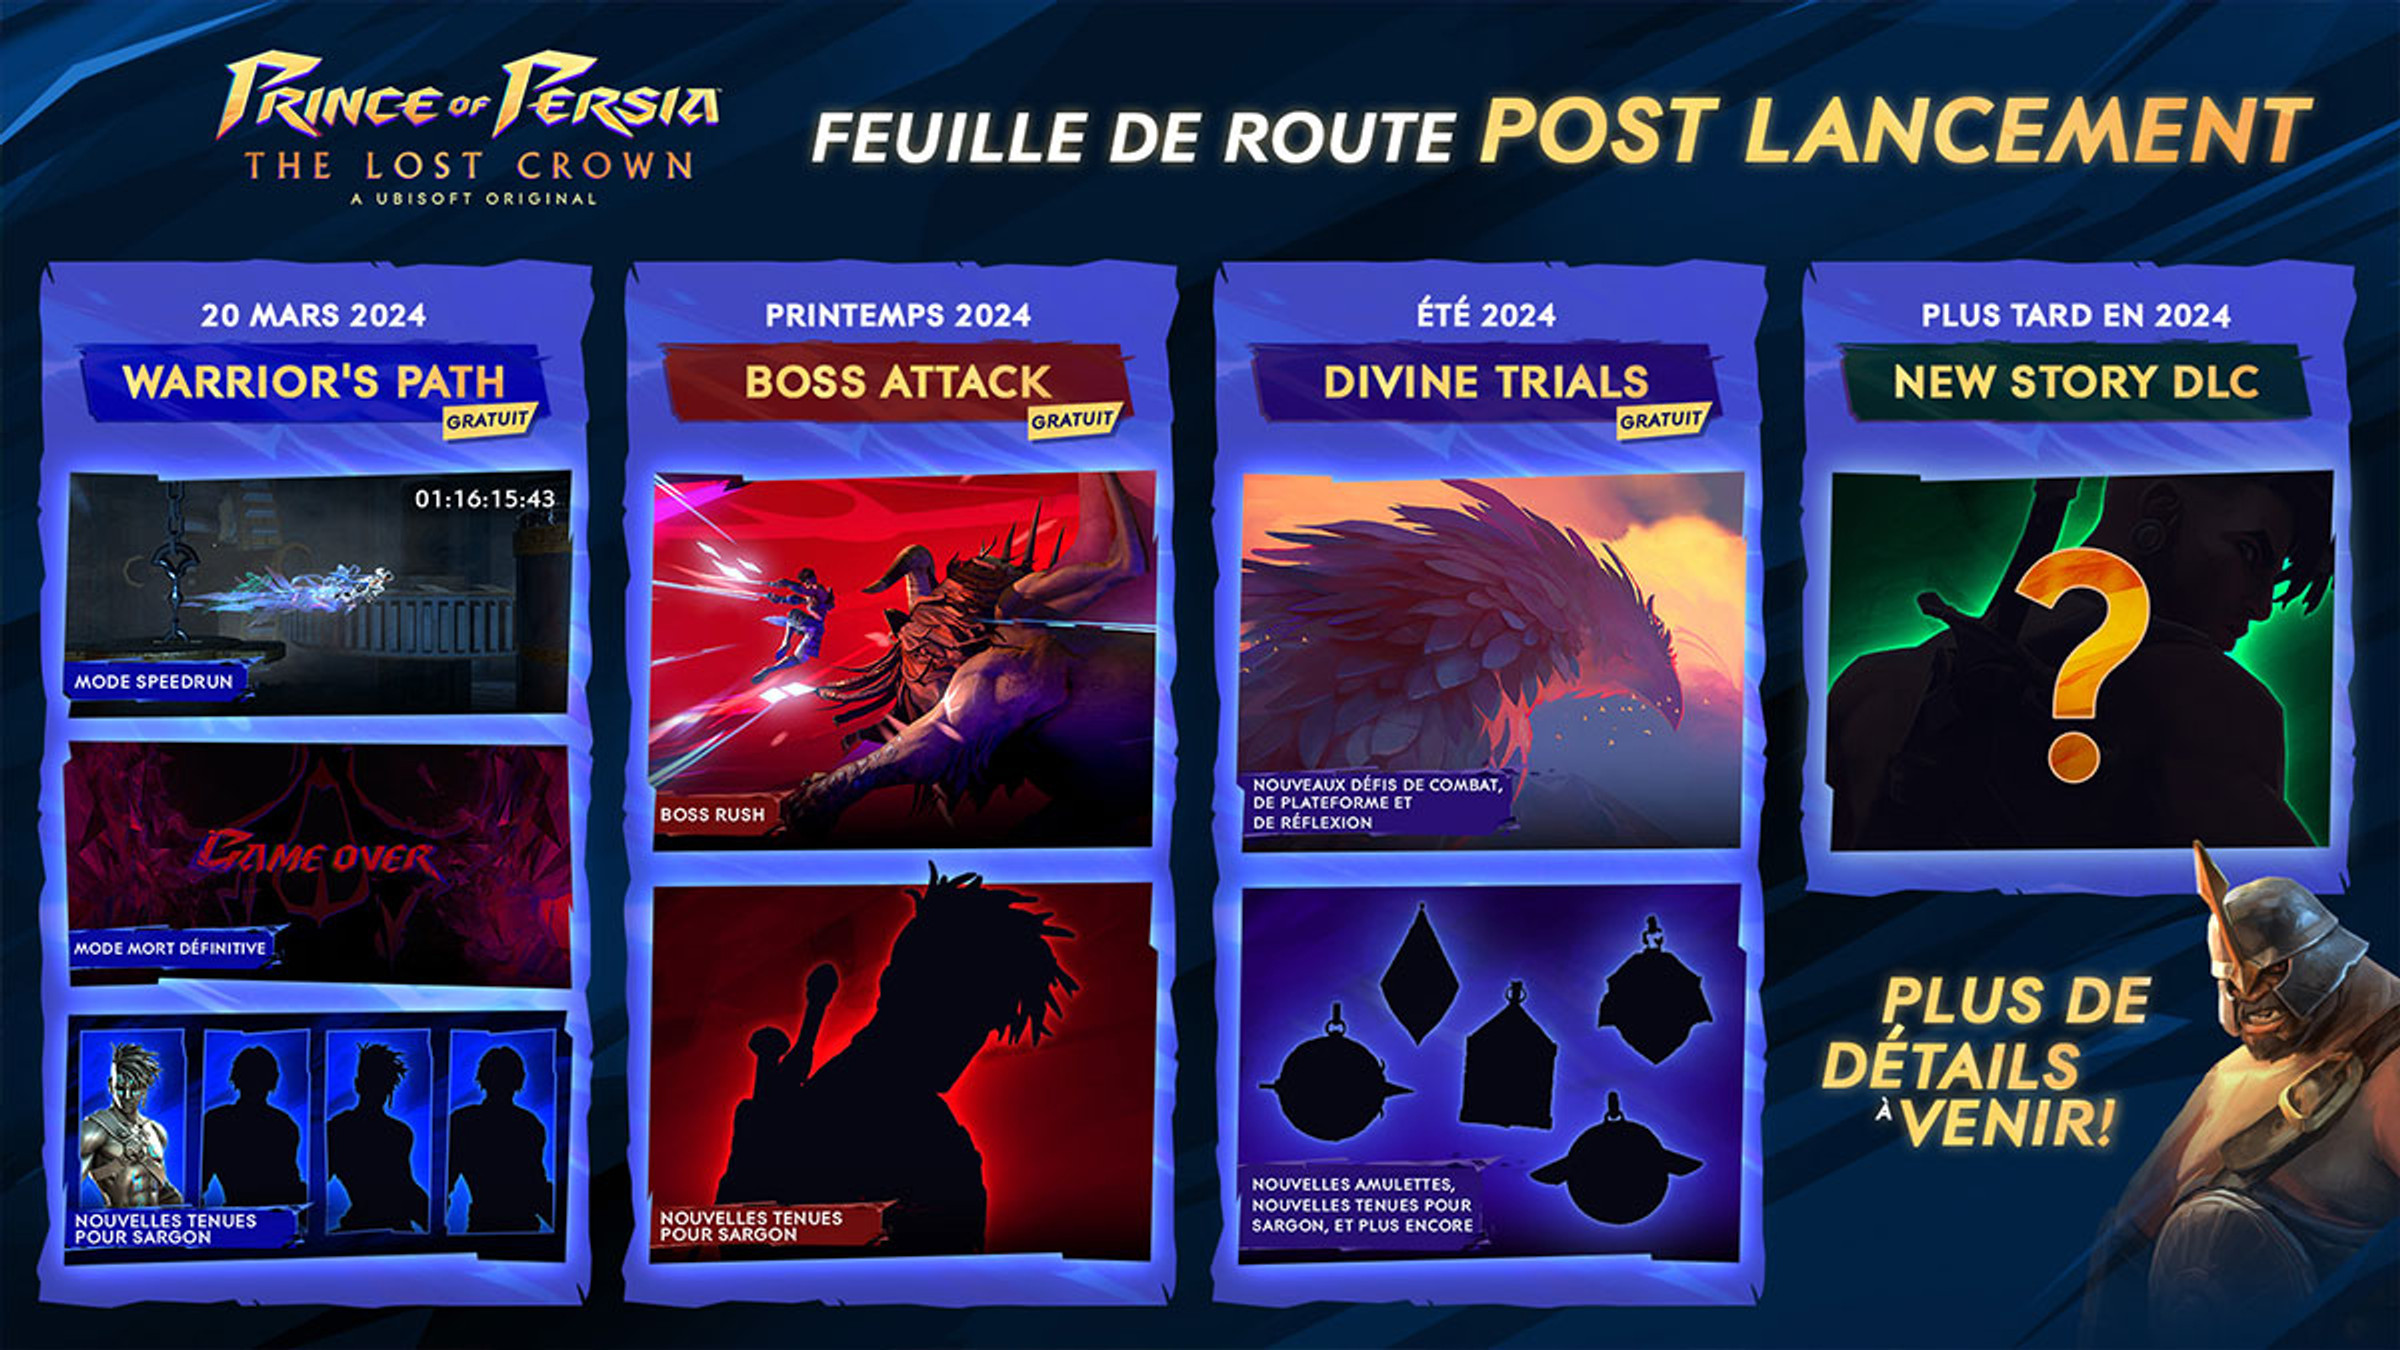 feuille-de-route-prince-of-persia-the-lost-crown